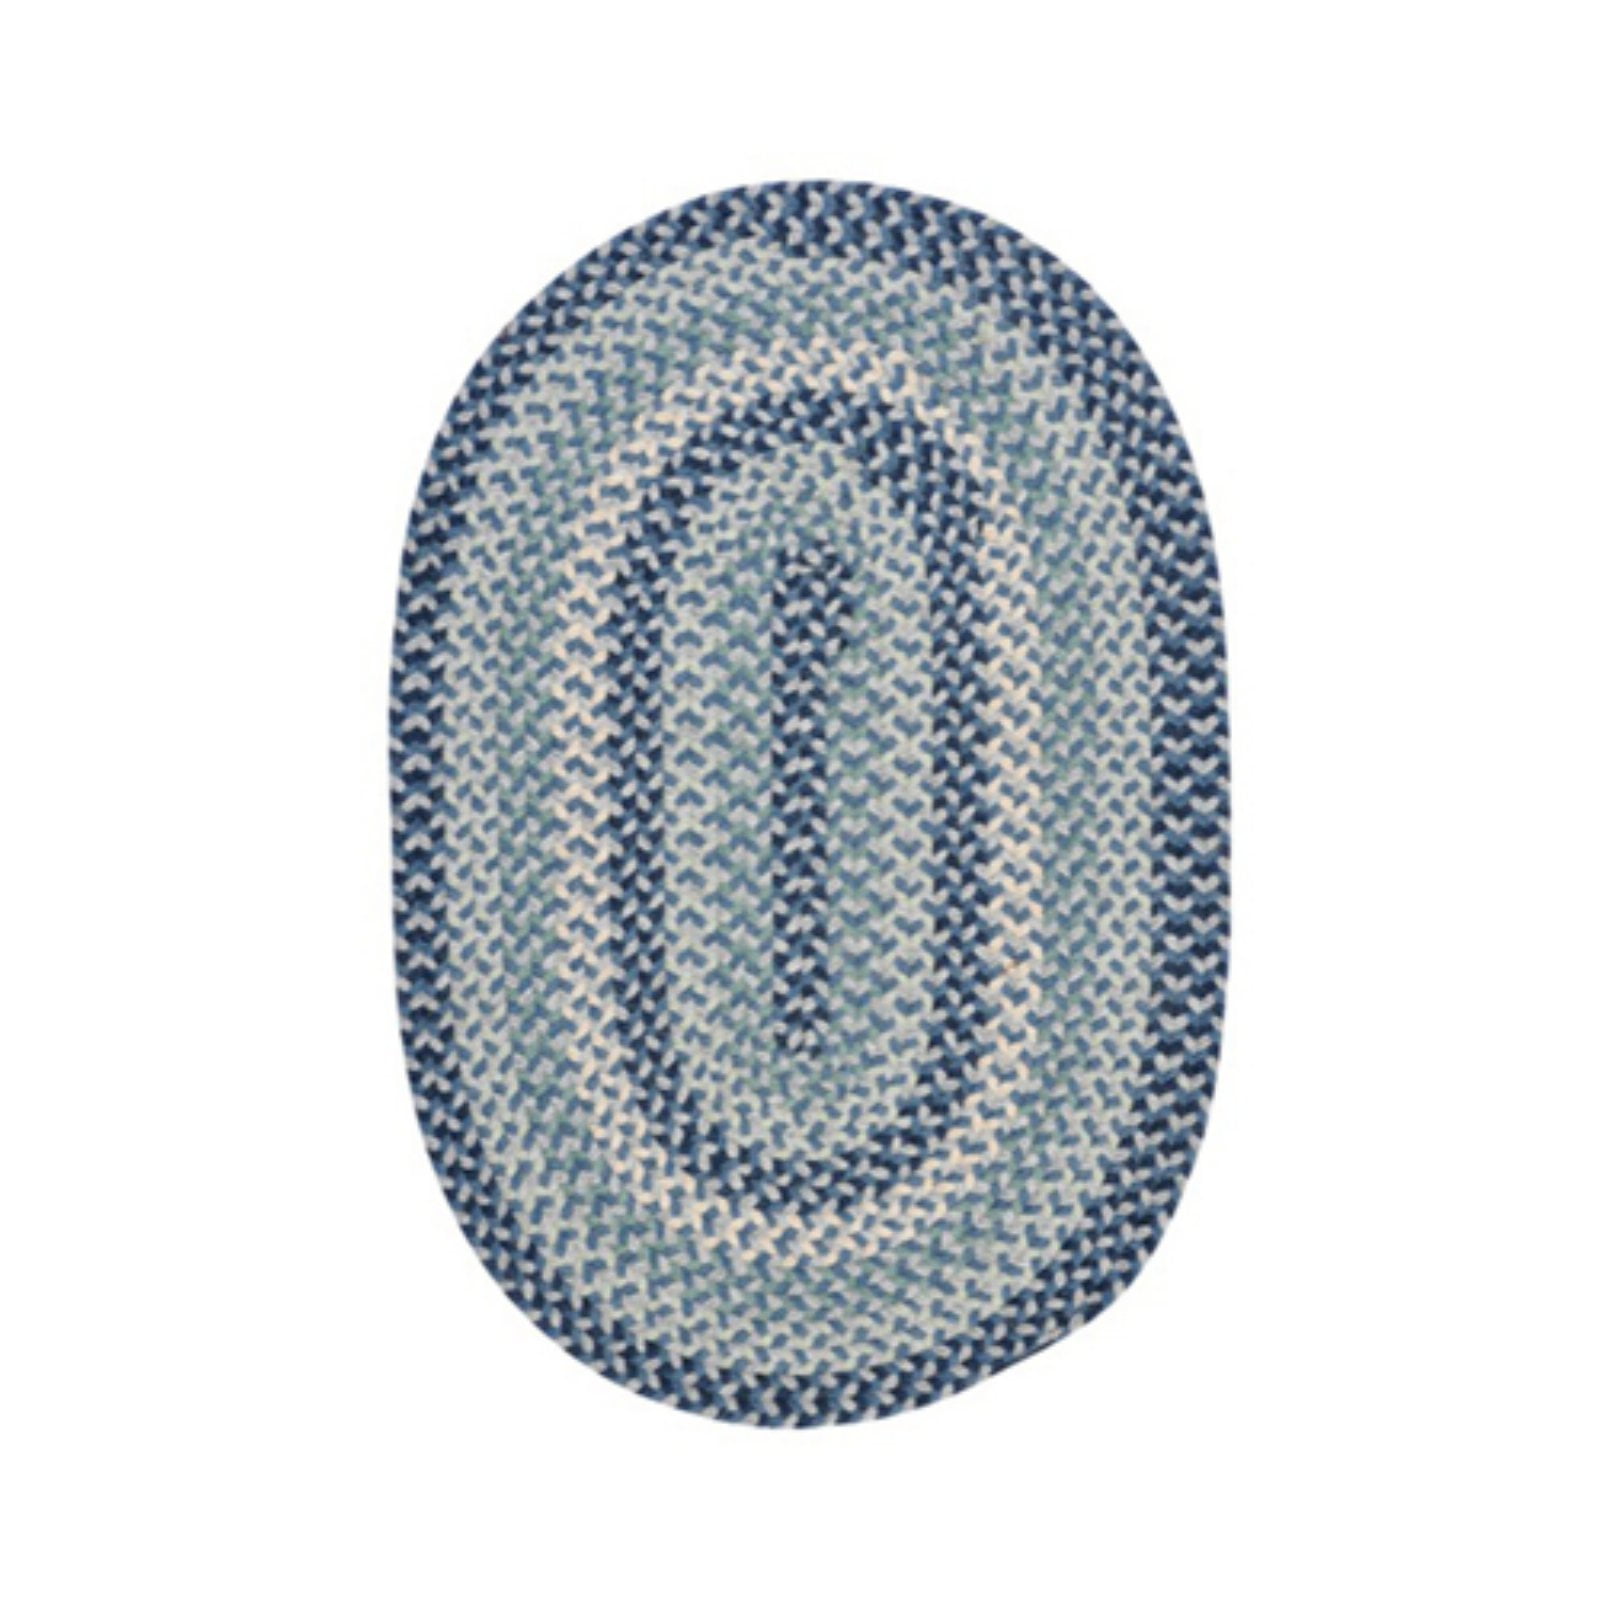 Bc53r132x168 11 X 14 Ft. Boston Common Oval Rug, Capeside Blue